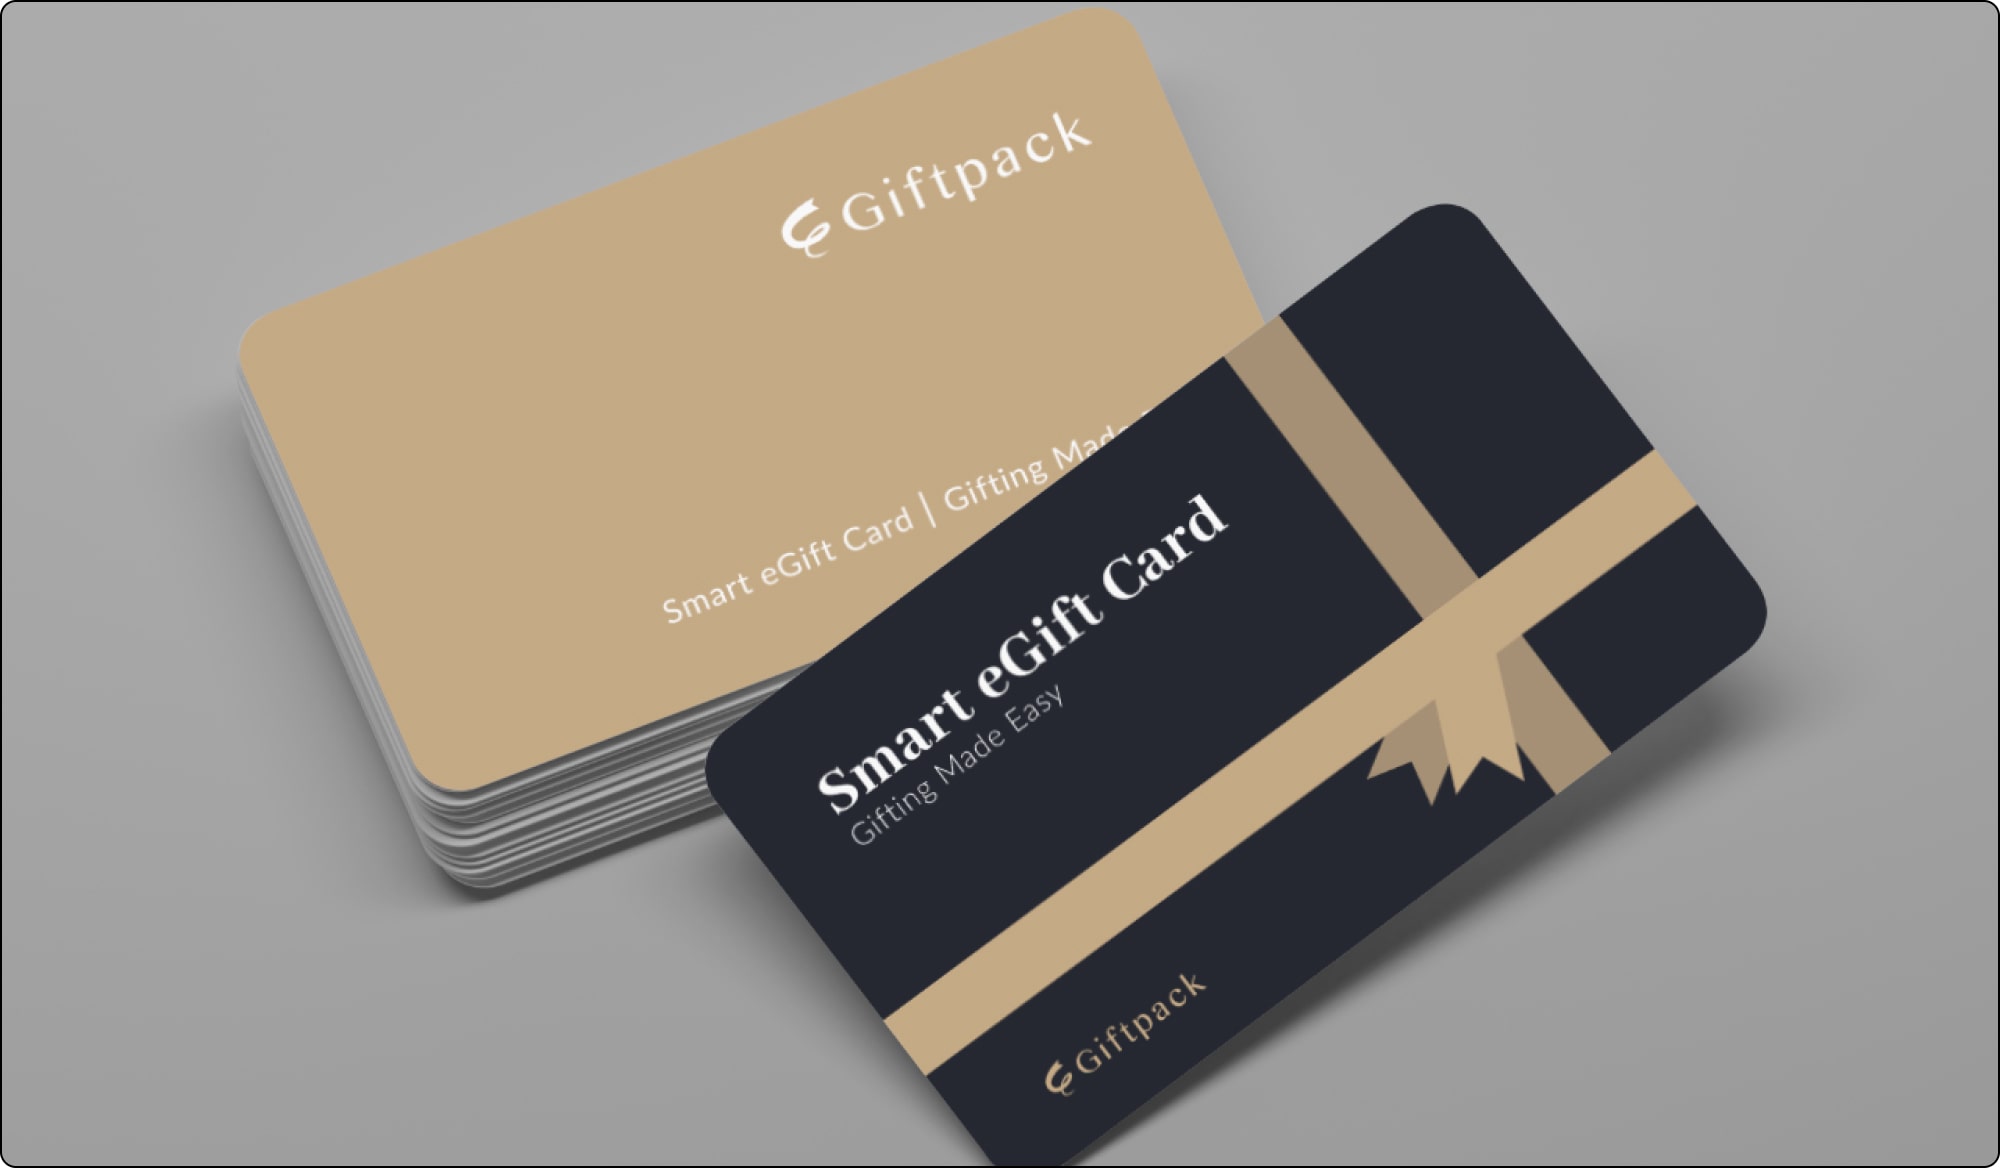 giftpack smart egift card for 350 brands for best holiday gifts for remote employees